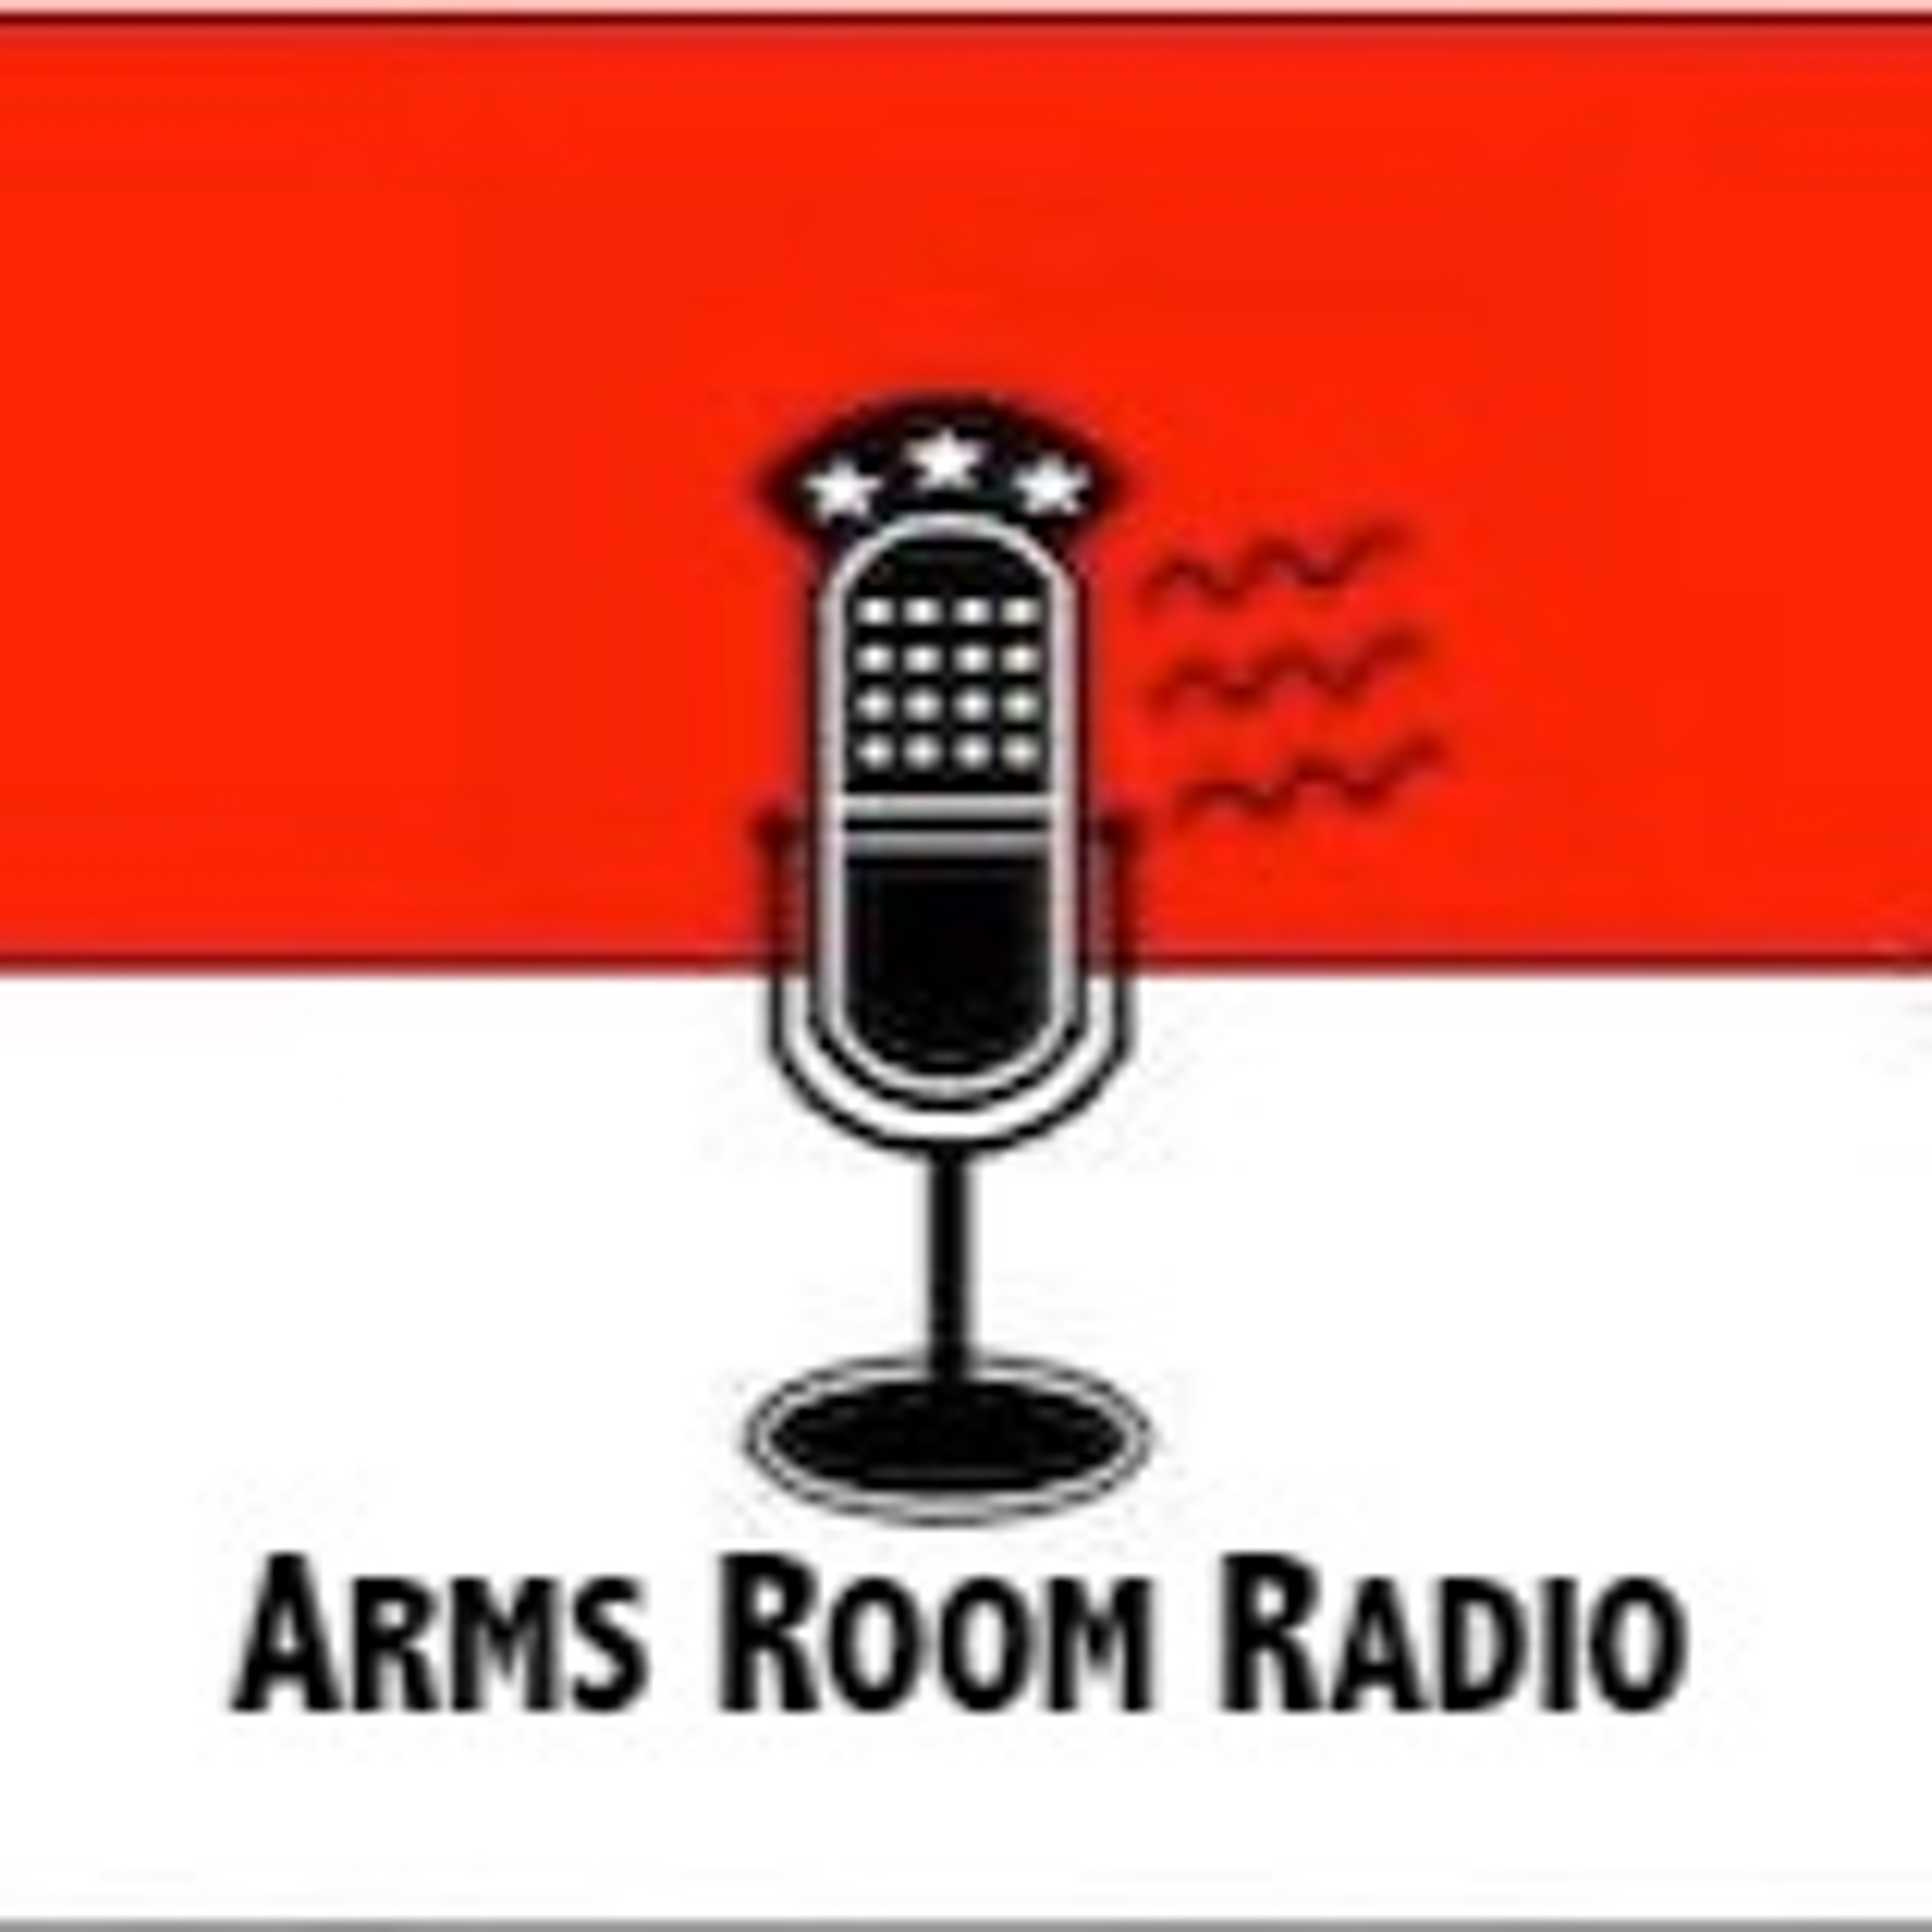 ArmsRoomRadio 03.16.19 Major Bill Co-hosts, Kirk from Ideal Conceal